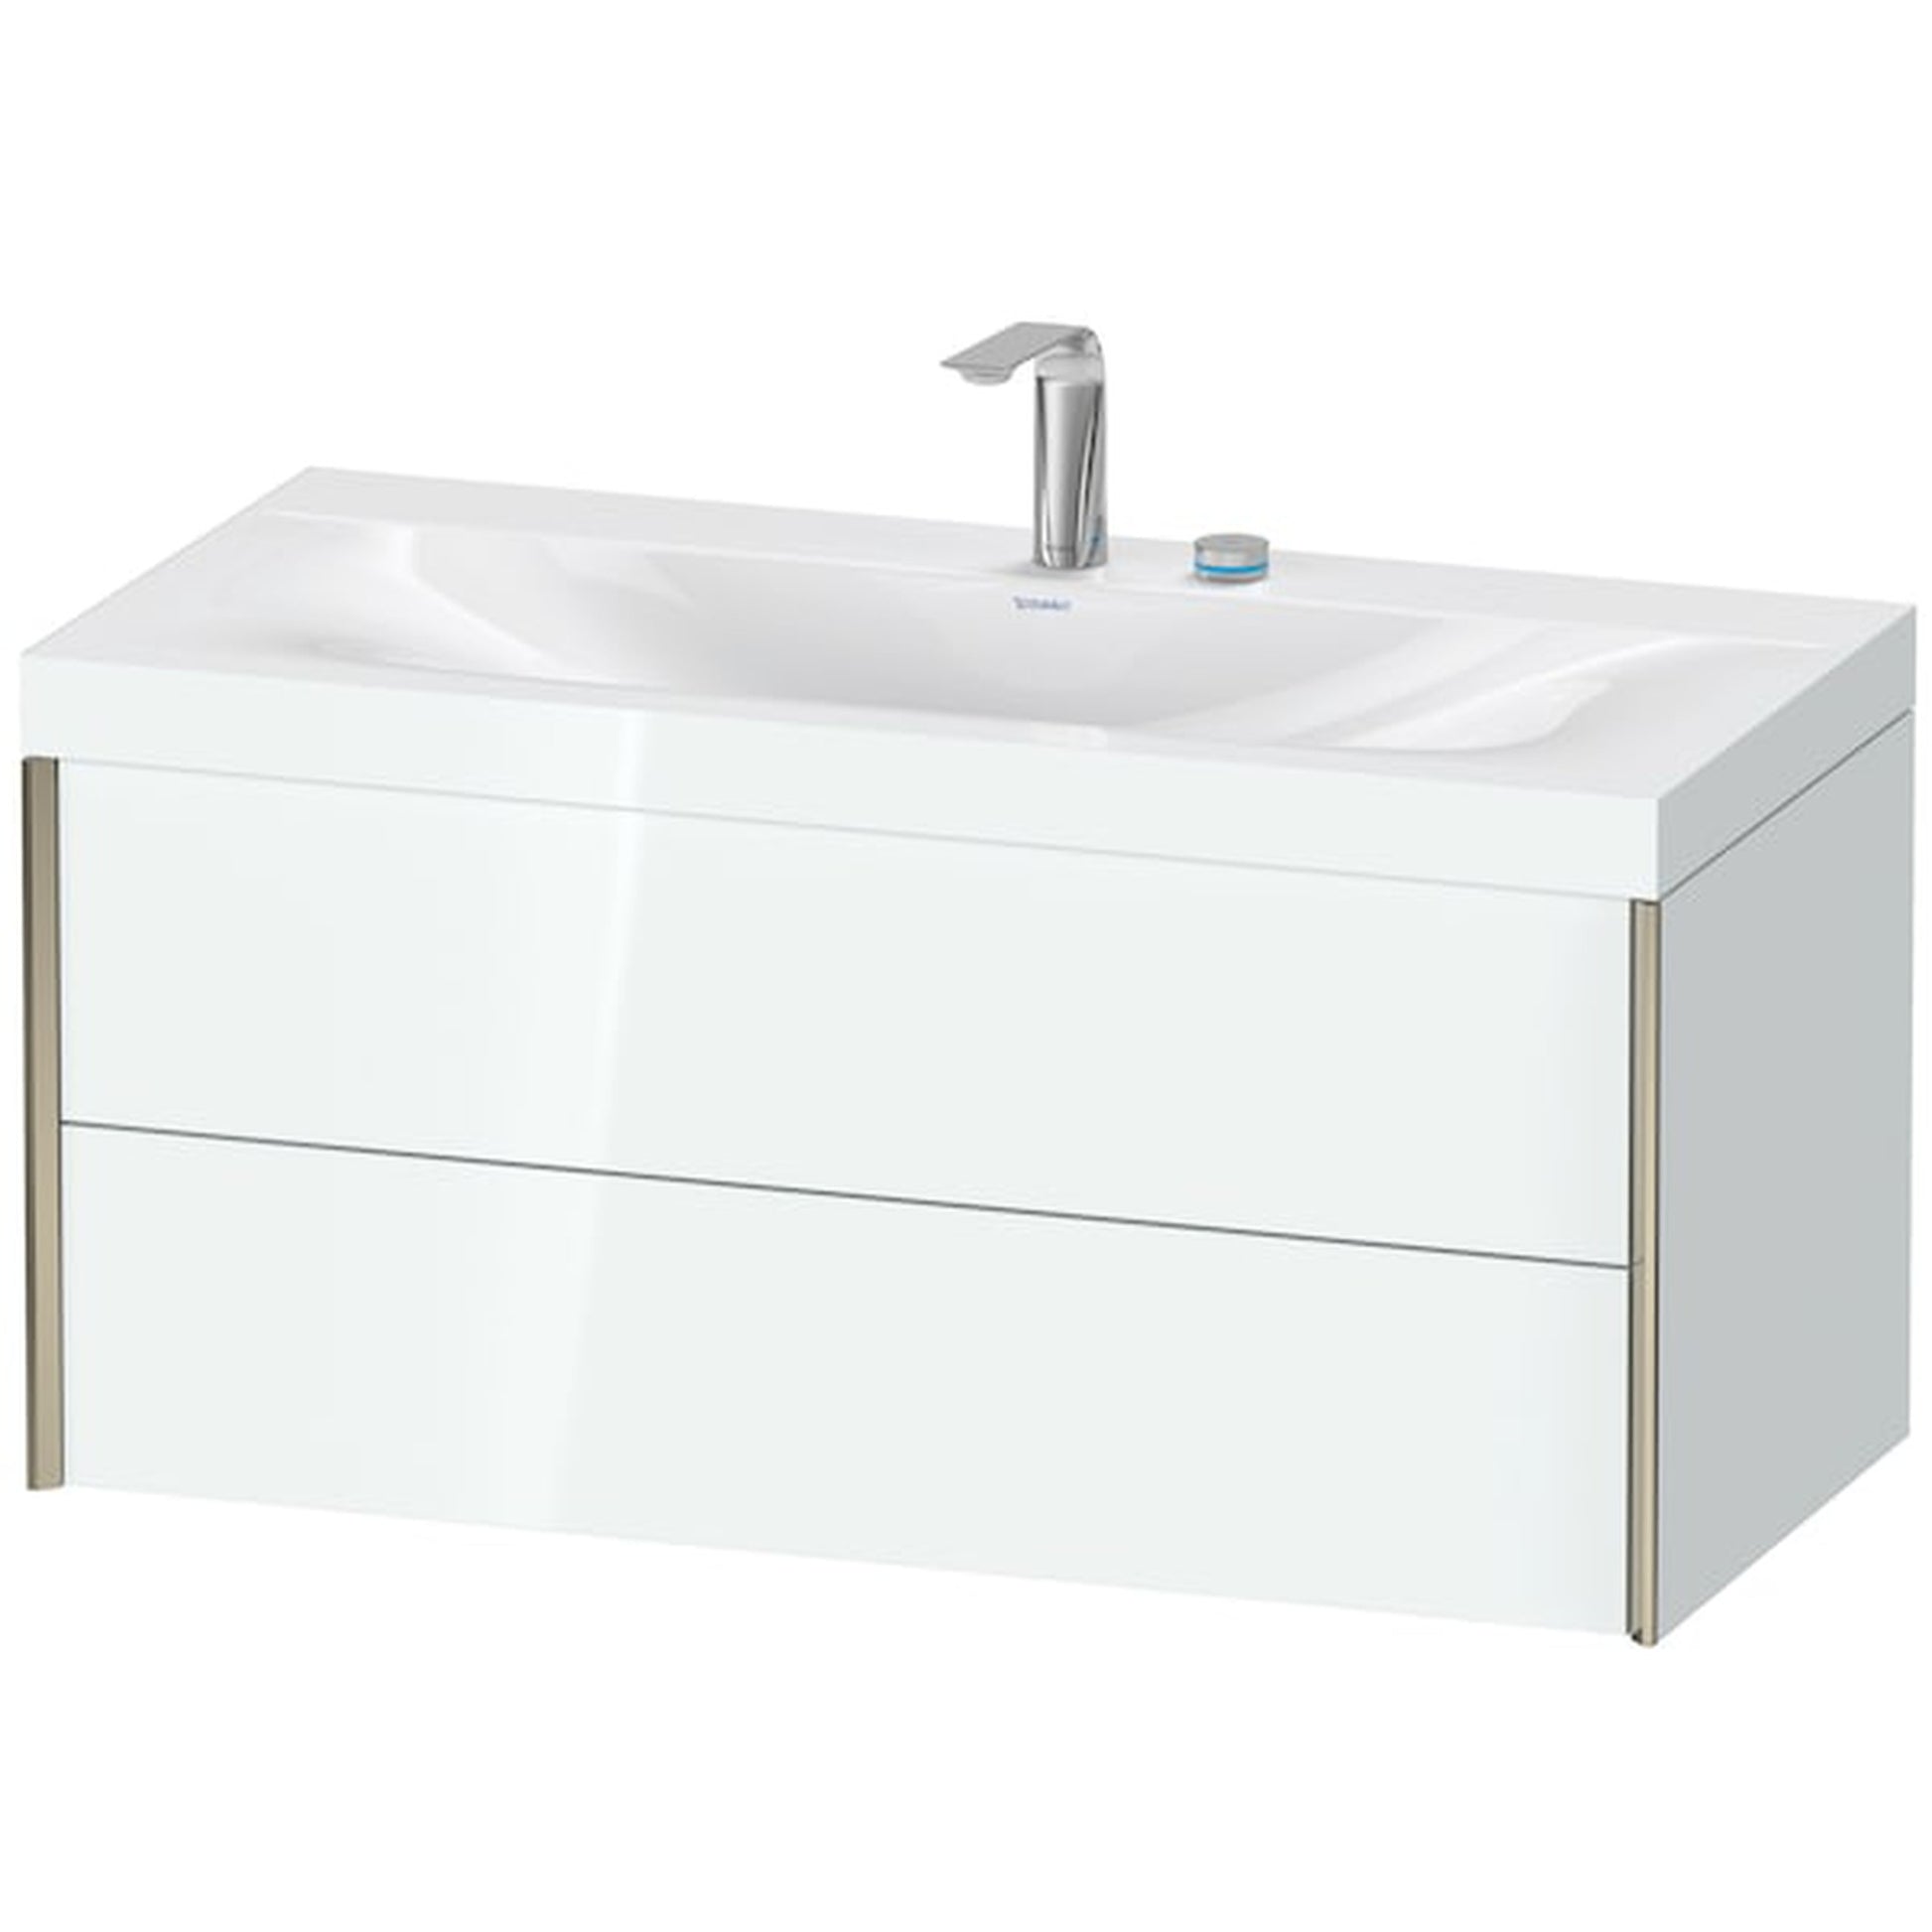 Duravit Xviu 39" x 20" x 19" Two Drawer C-Bonded Wall-Mount Vanity Kit With Two Tap Holes, White (XV4616EB185C)